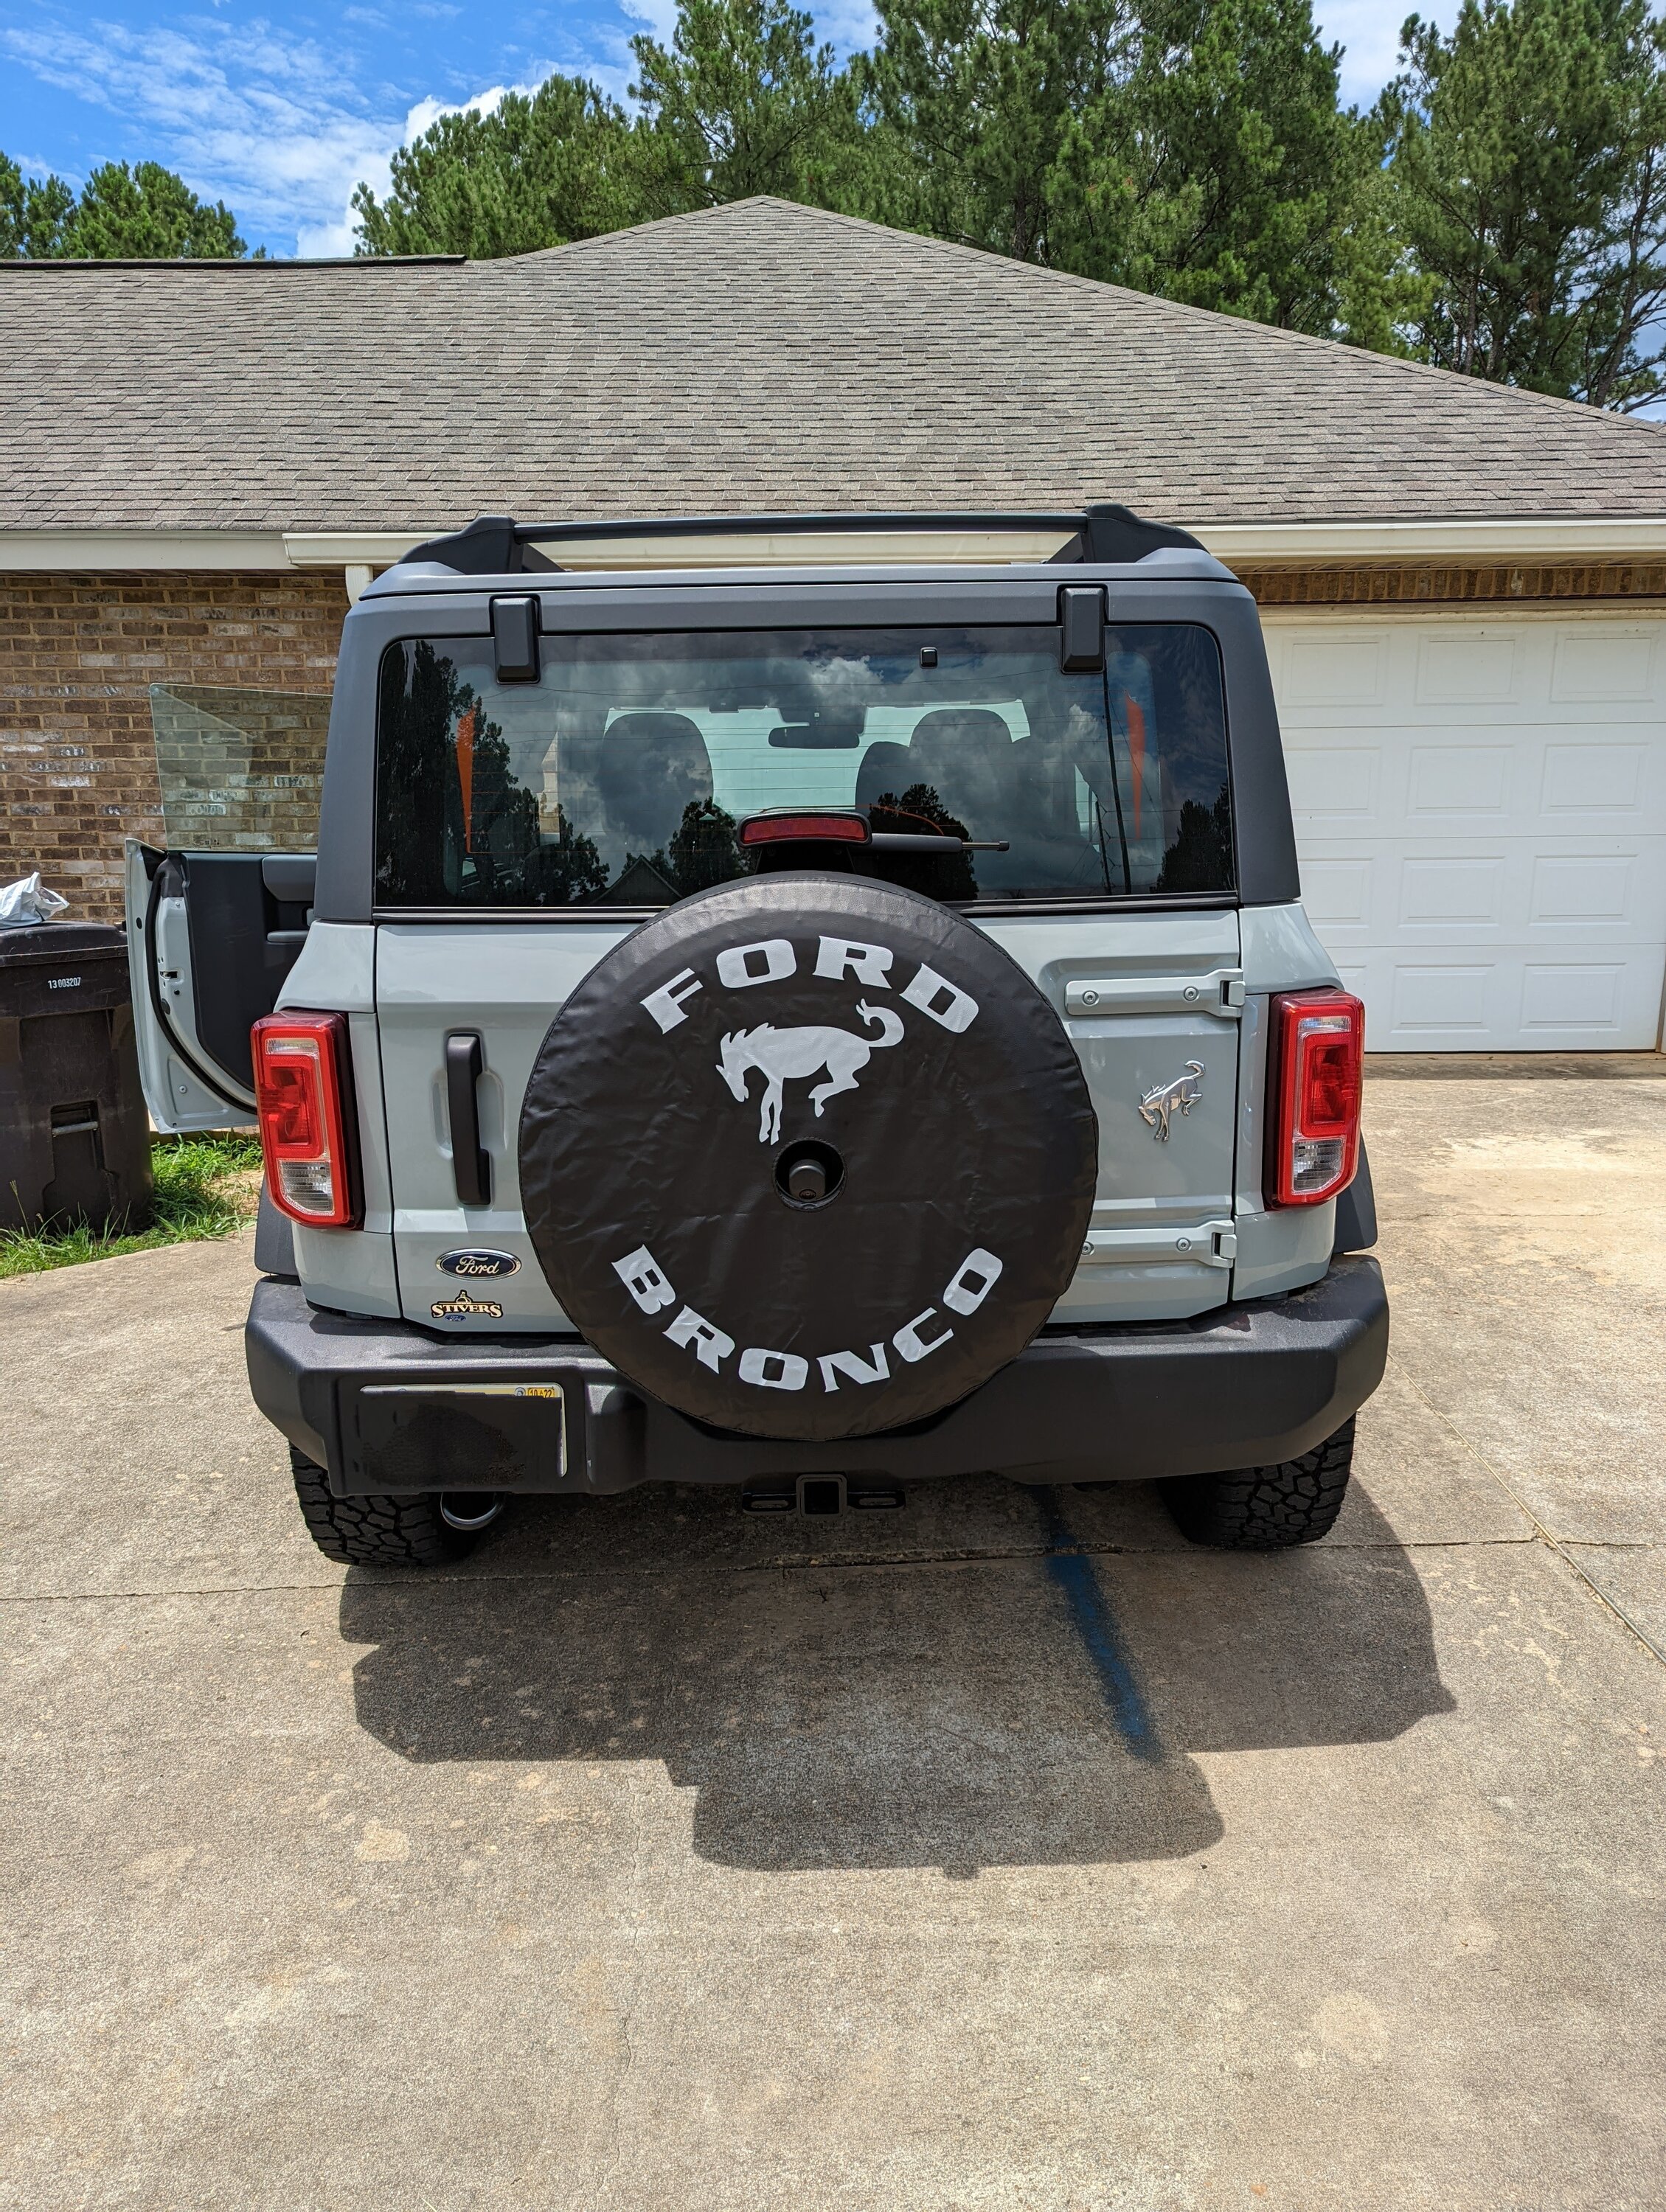 Ford Bronco Spare tire cover or no? PXL_20220701_182251813_2